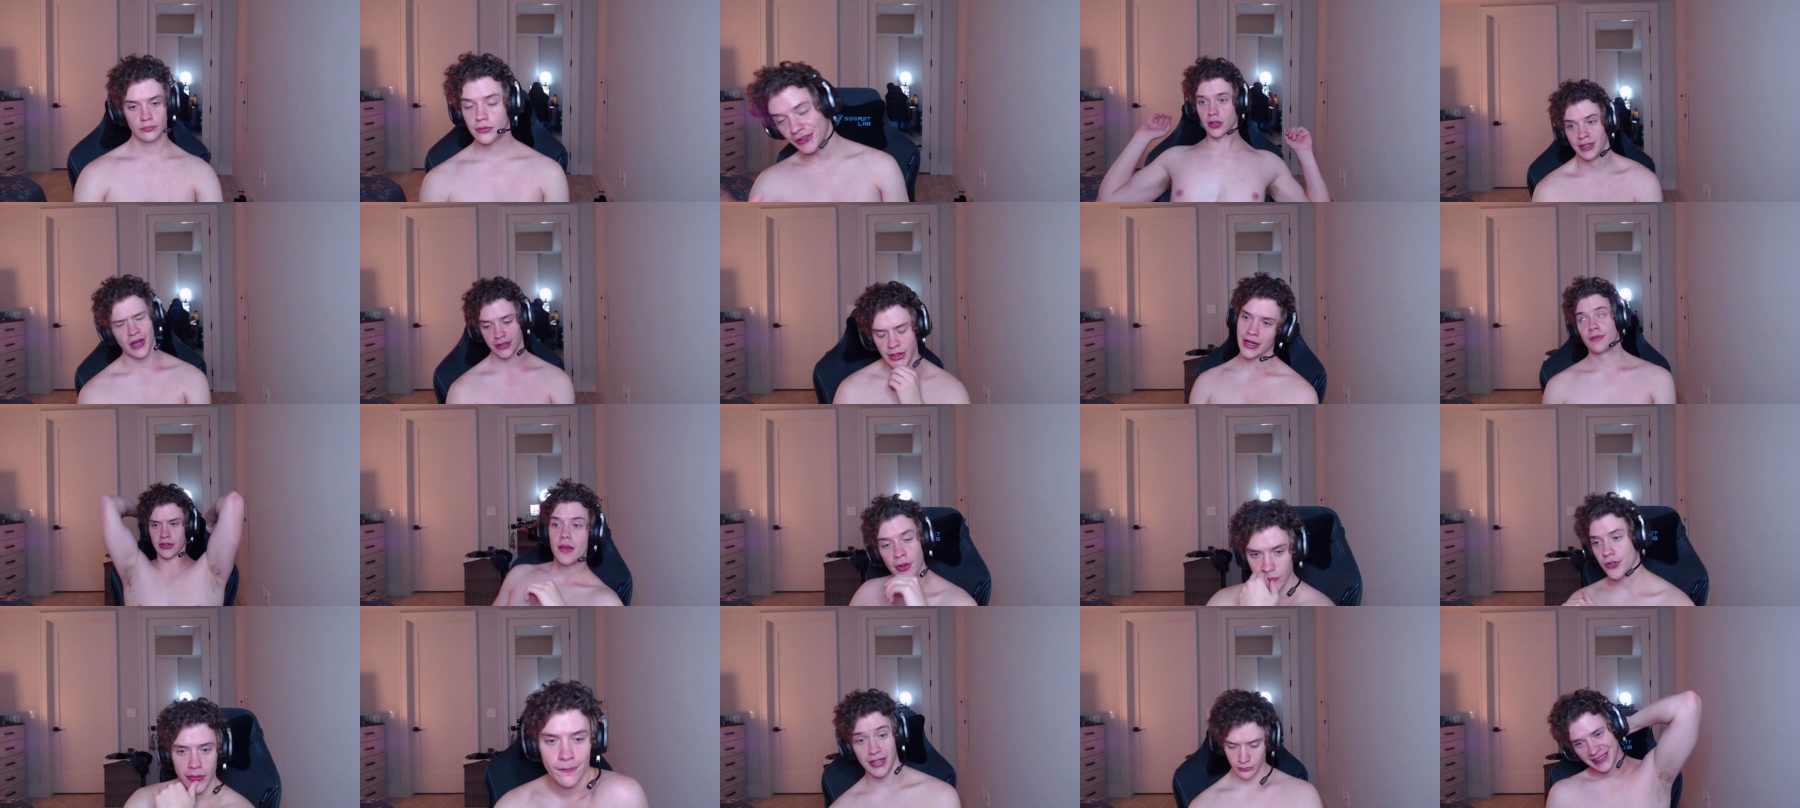 Ironthud  26-11-2021 Male Topless